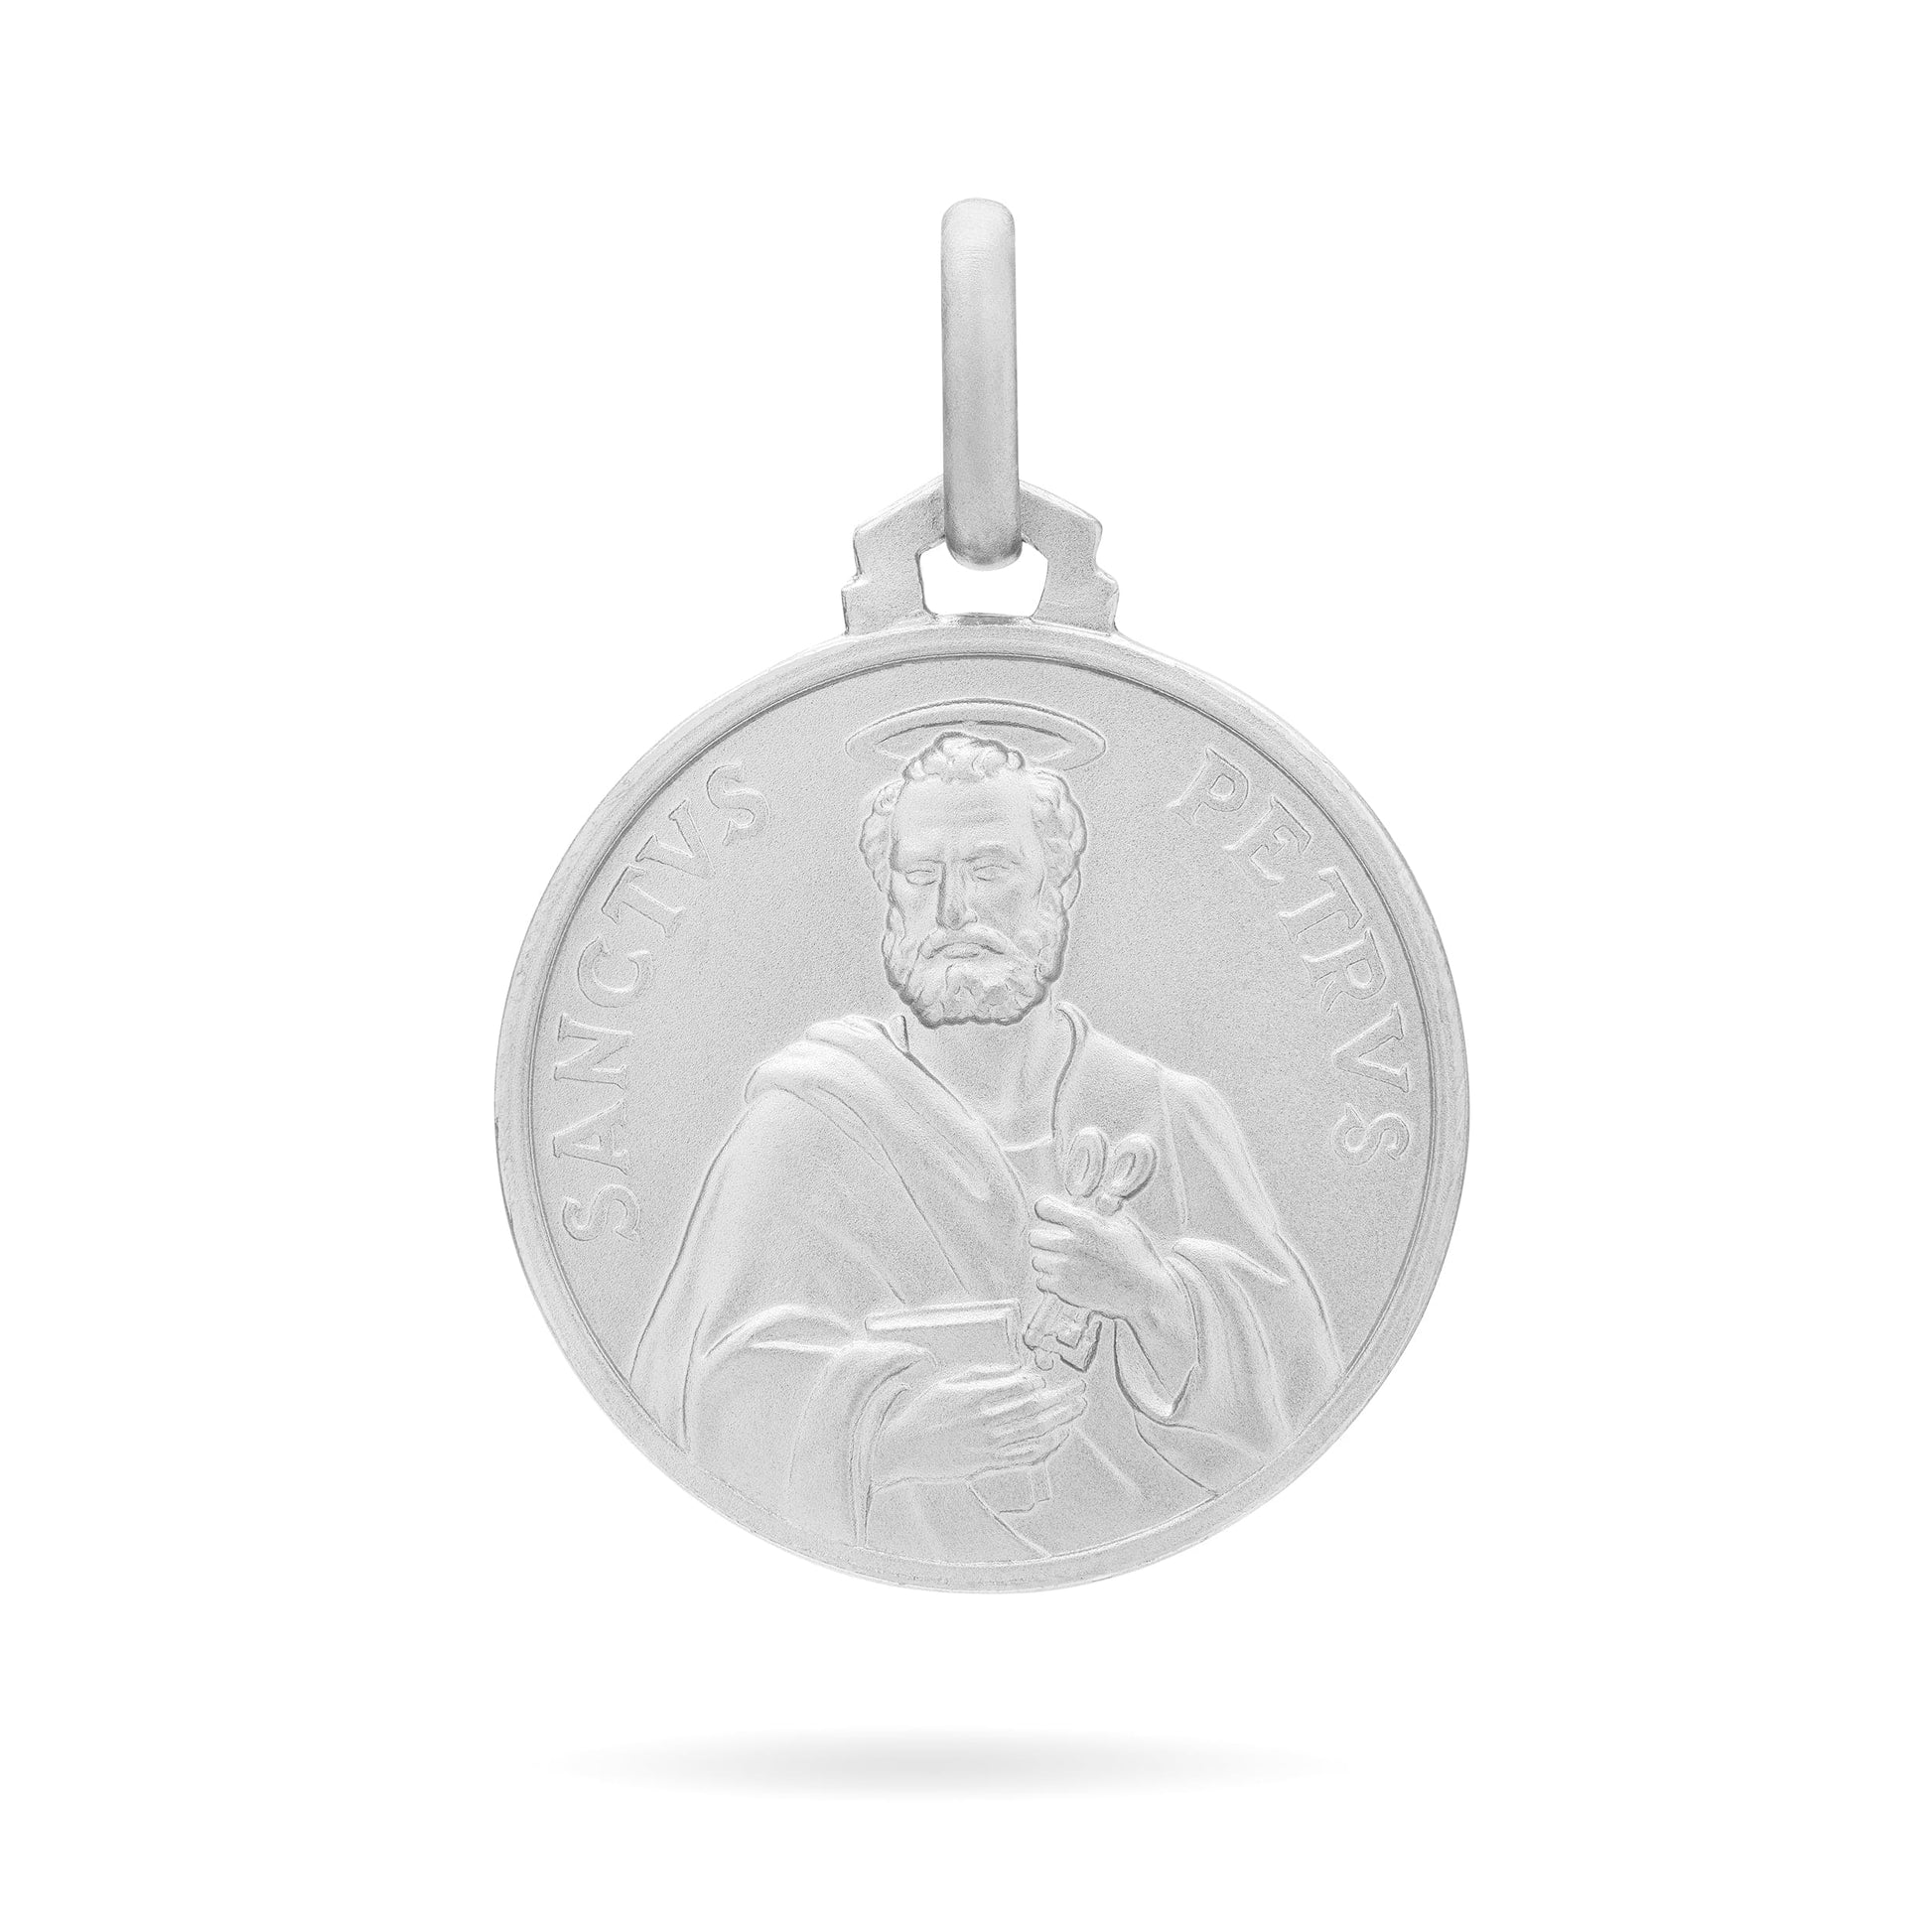 MONDO CATTOLICO Medal 10 mm (0.39 in) Sterling Silver medal of Saint Peter